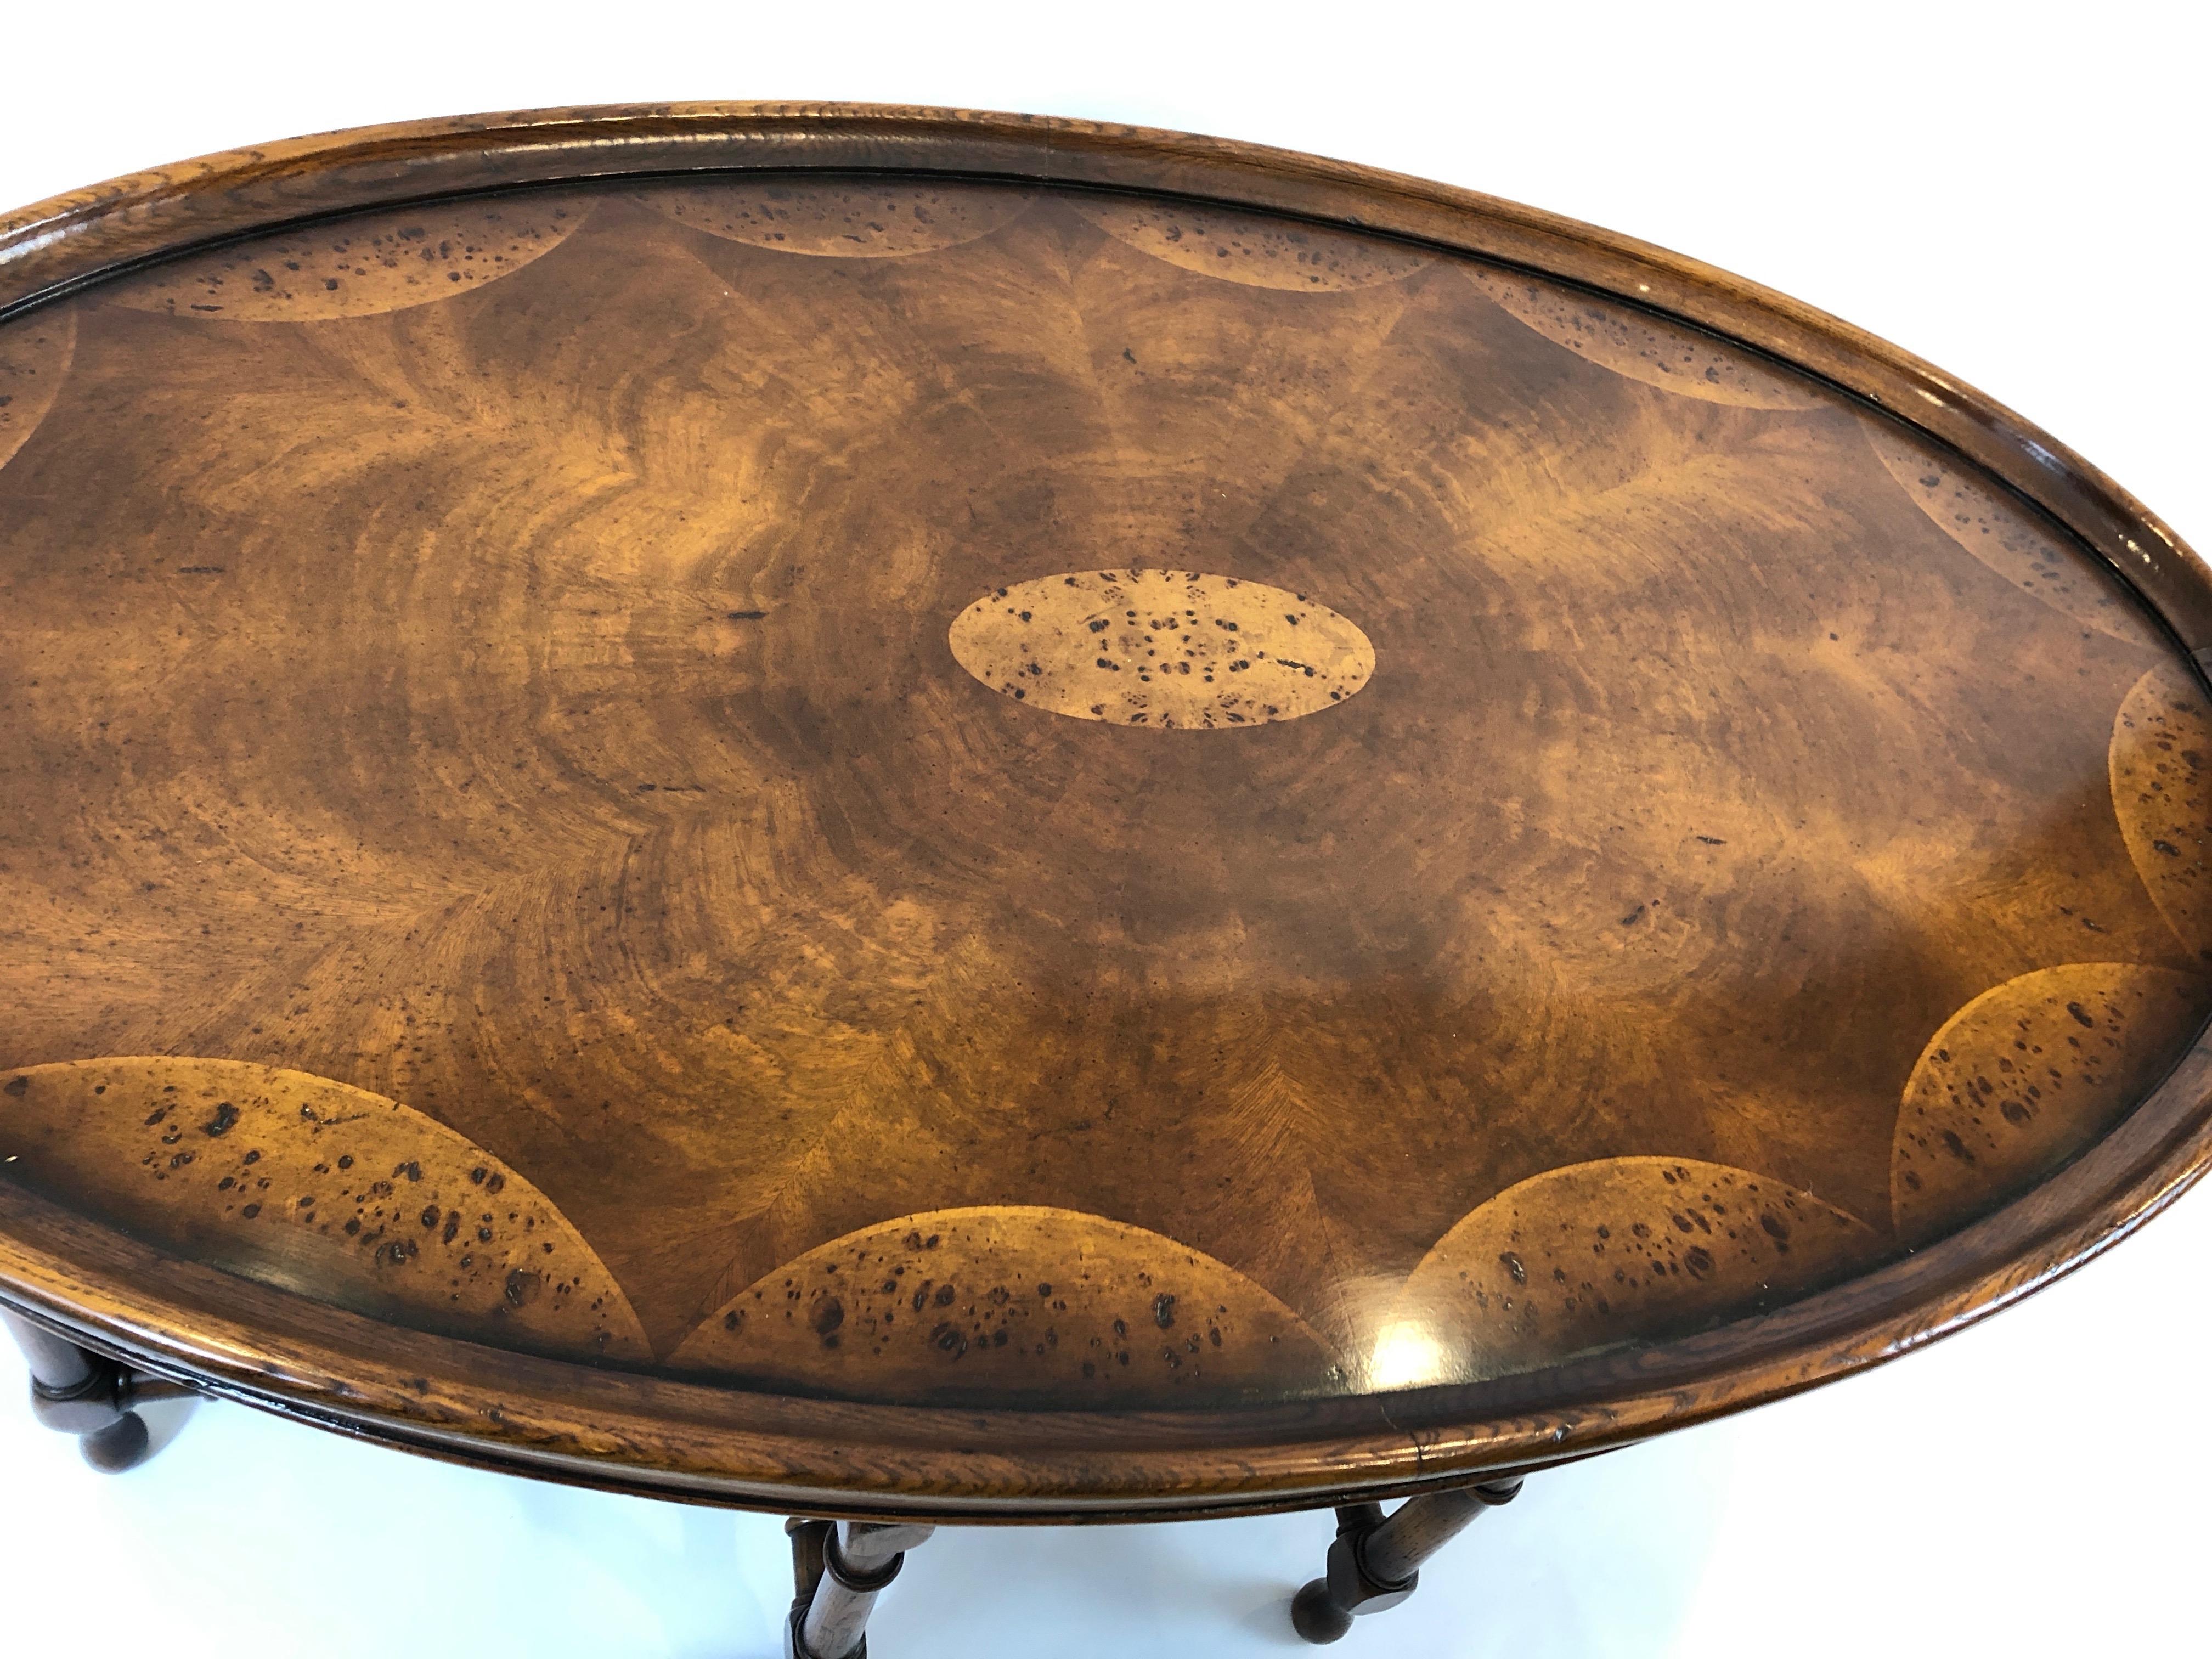 Oak Very Rich Handsome English Oval Inlaid Burl Wood Coffee Table